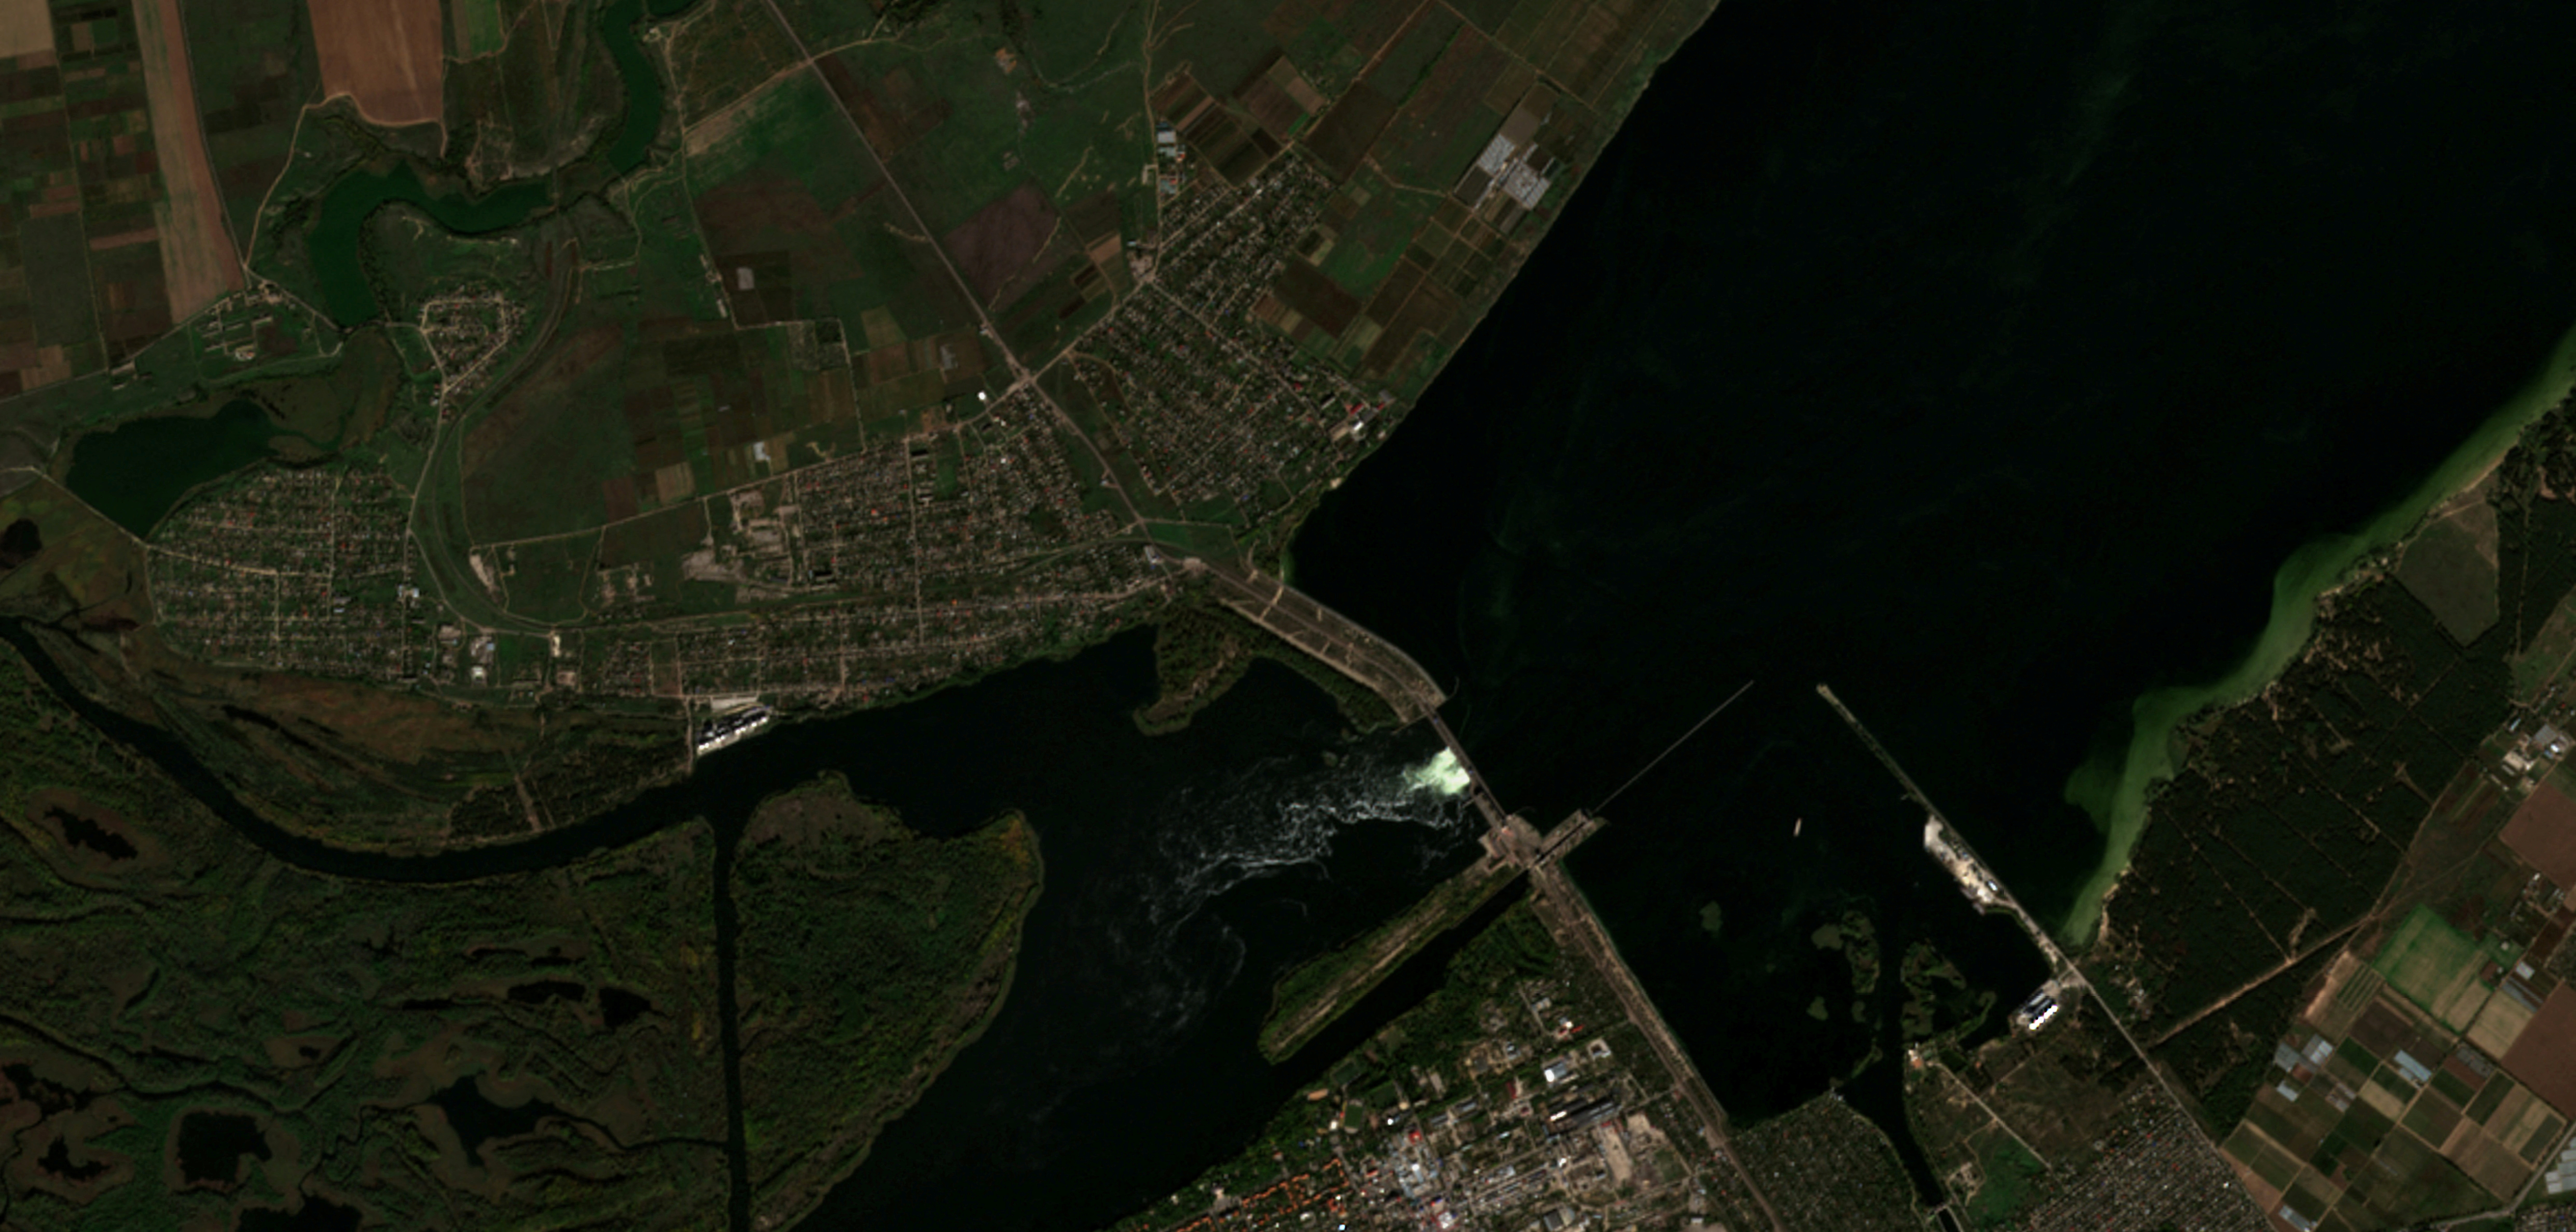 A satellite image shows a view of the location of the Kakhovka dam and the surrounding region in Kherson Oblast